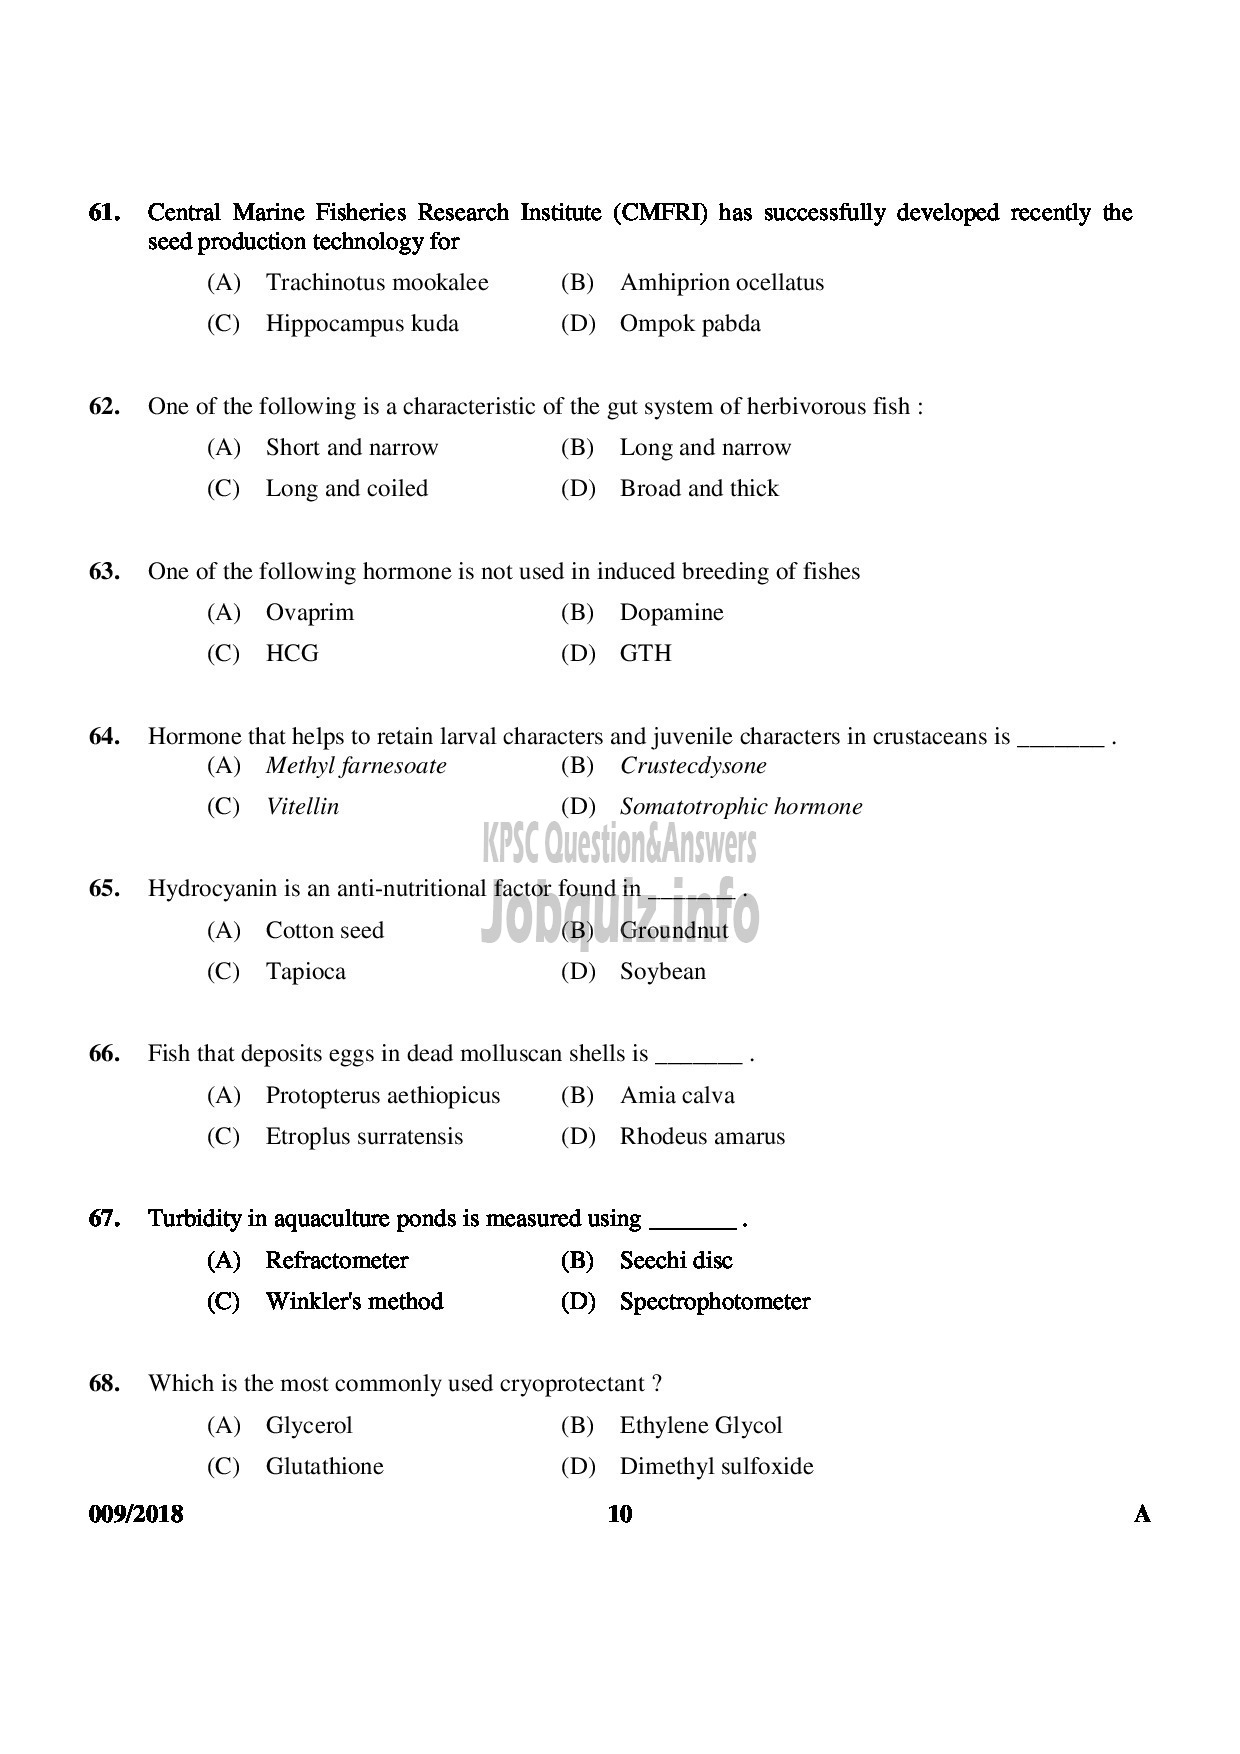 Kerala PSC Question Paper - VOCATIONAL INSTRUCTOR IN FISHERIES VOCATIONAL HIGHER SECONDARY EDUCATION-10